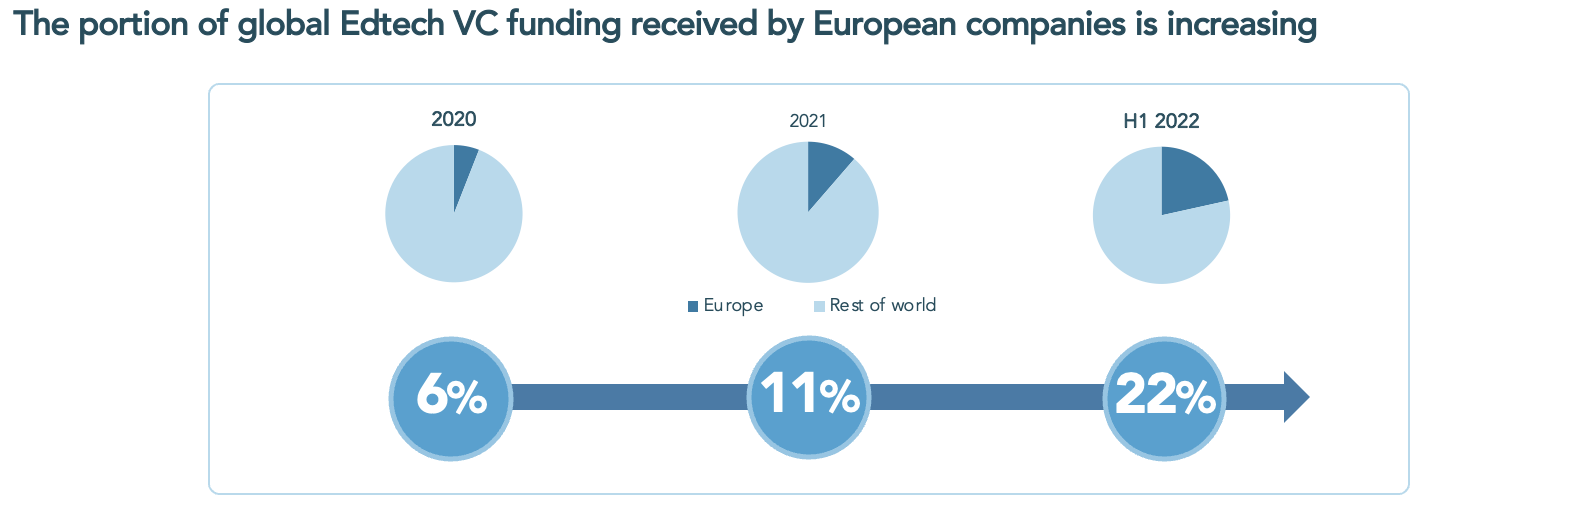 The portion of global edtech VC funding received by European companies is increasing